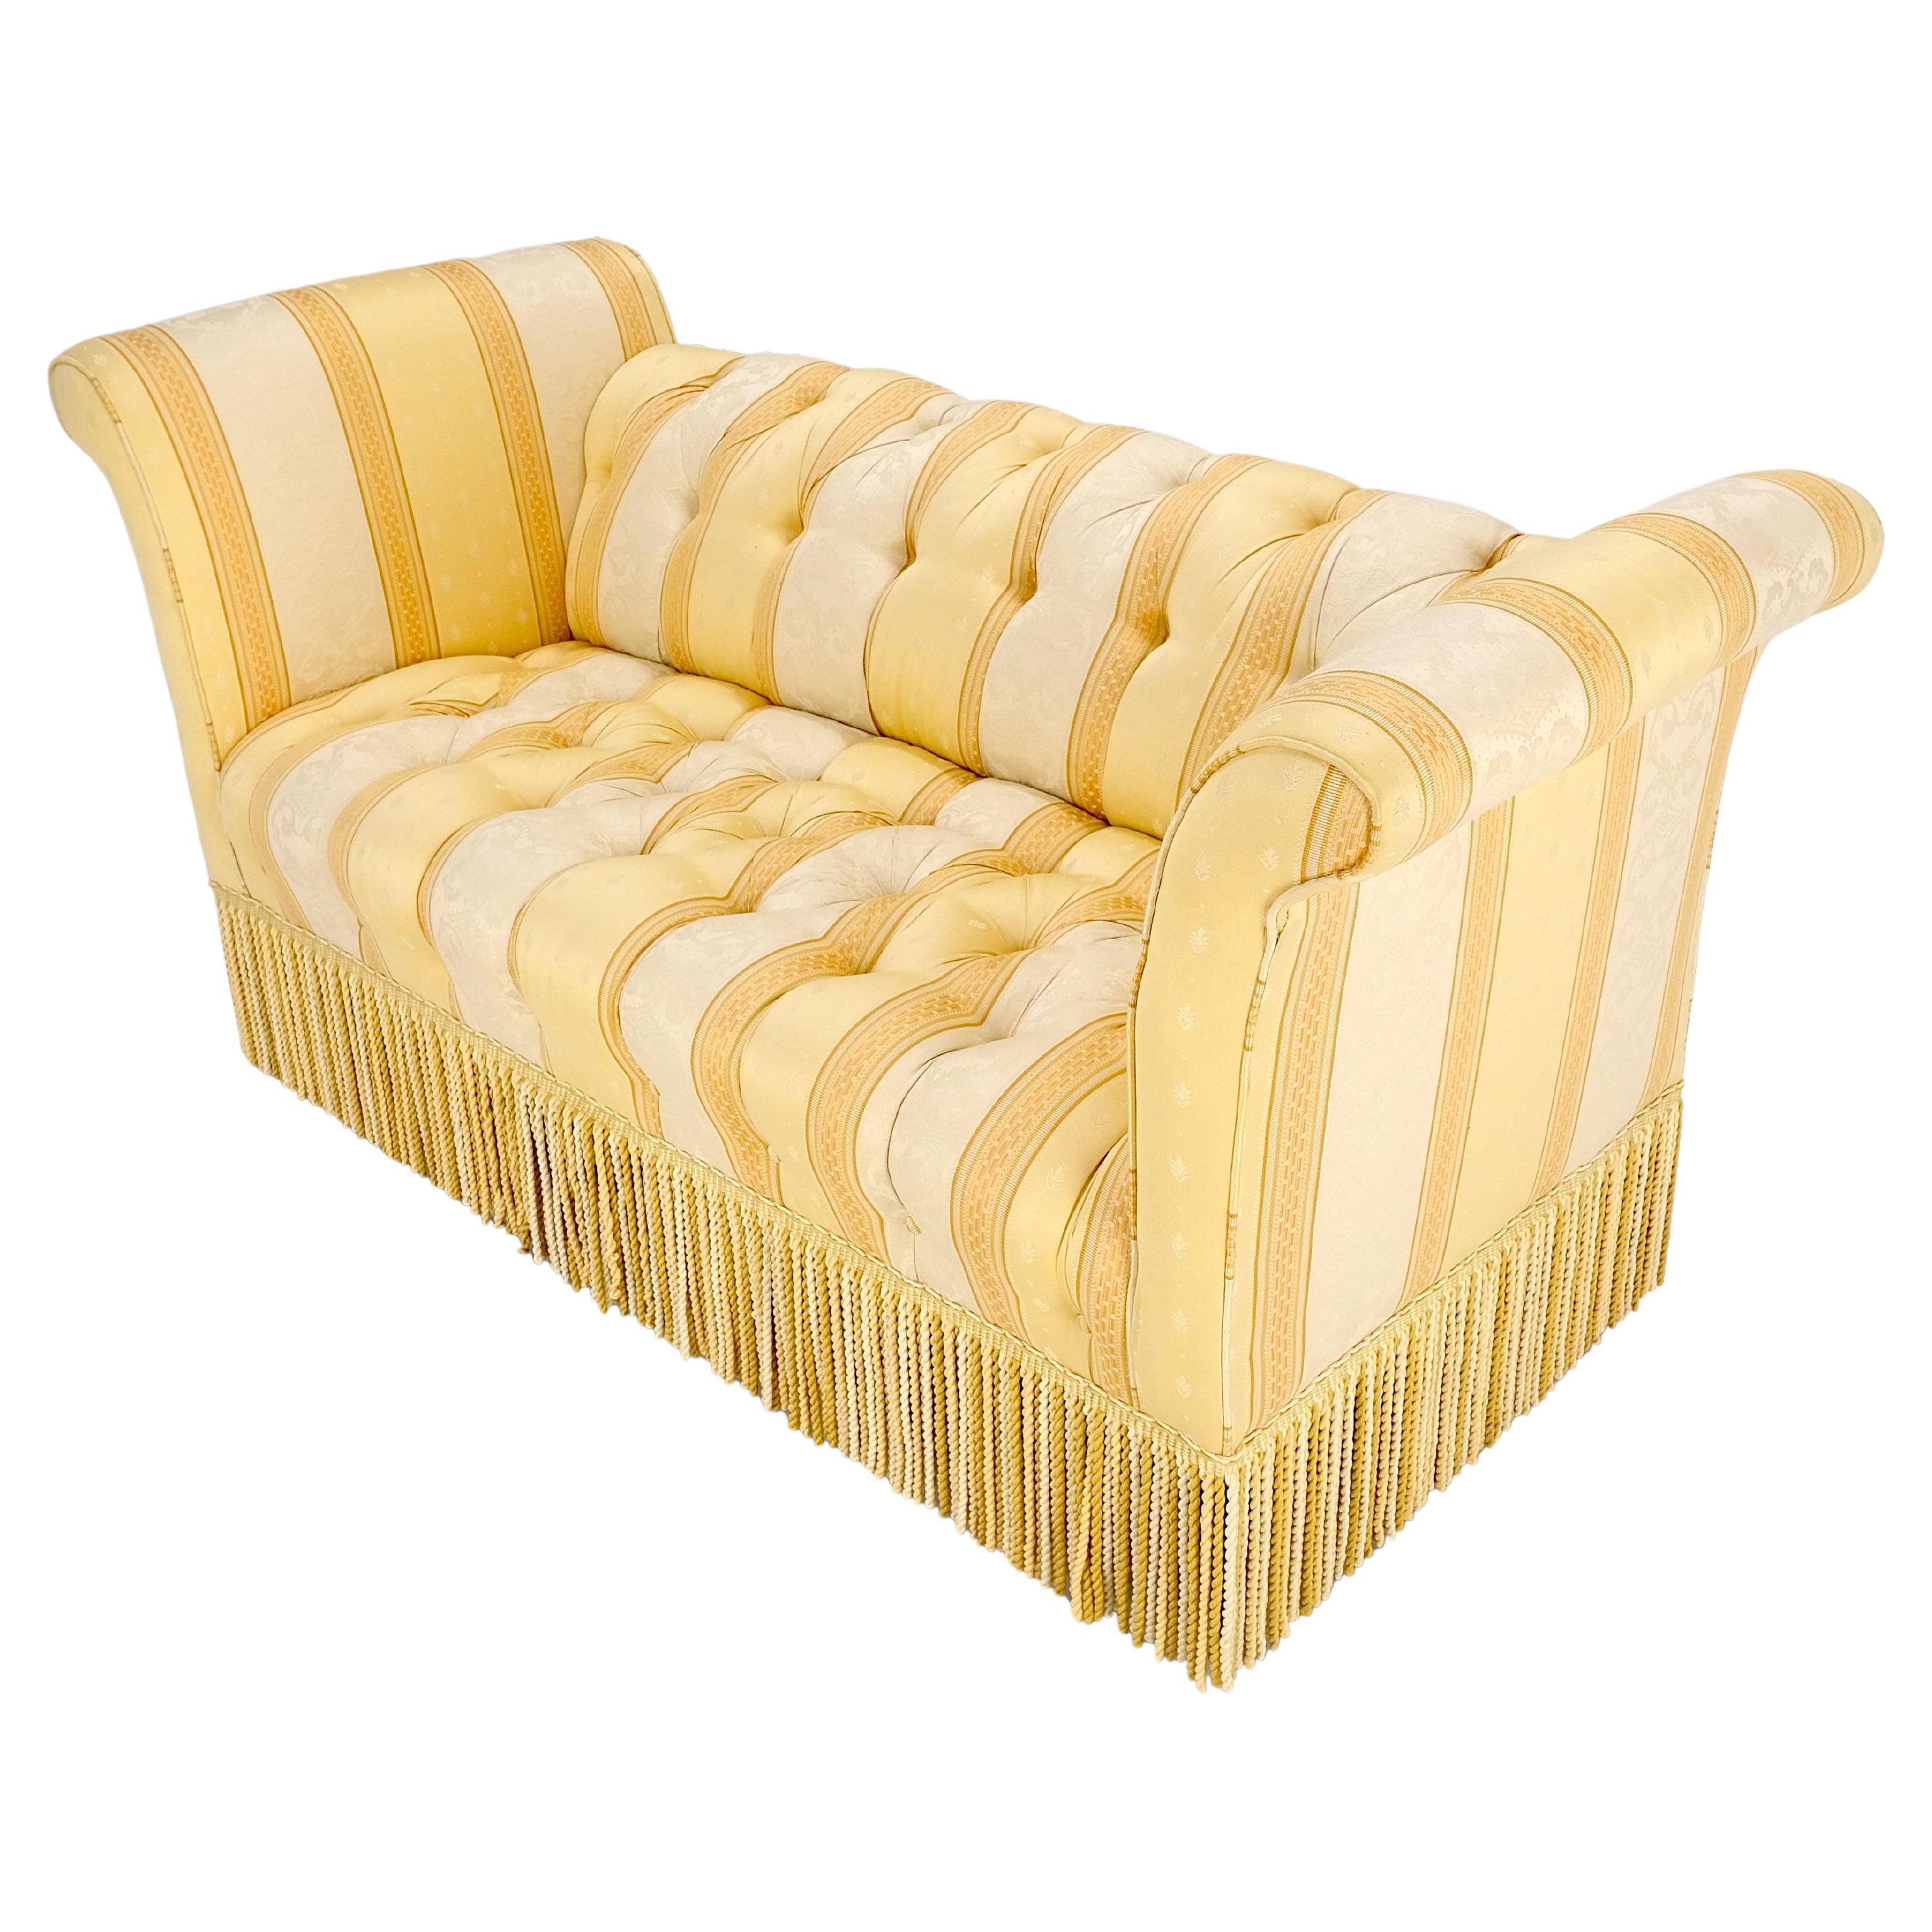 Gold & White Stripe Silk Upholstery Tufted Sofa Loveseat Tassels Decorated MINT! For Sale